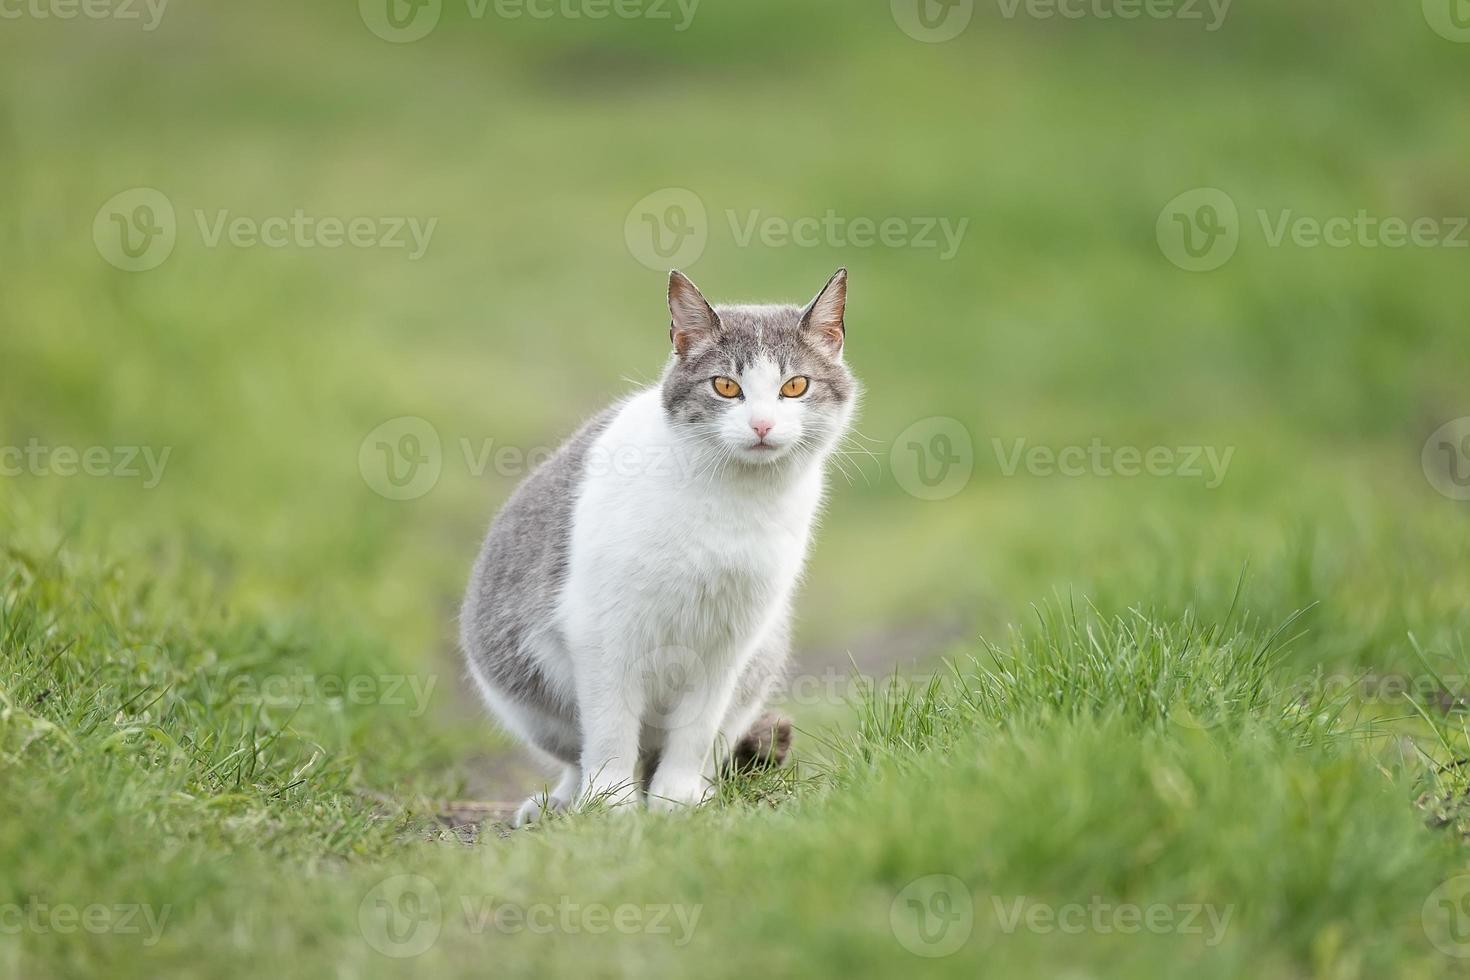 Cute cat playing in the park on rainy day photo